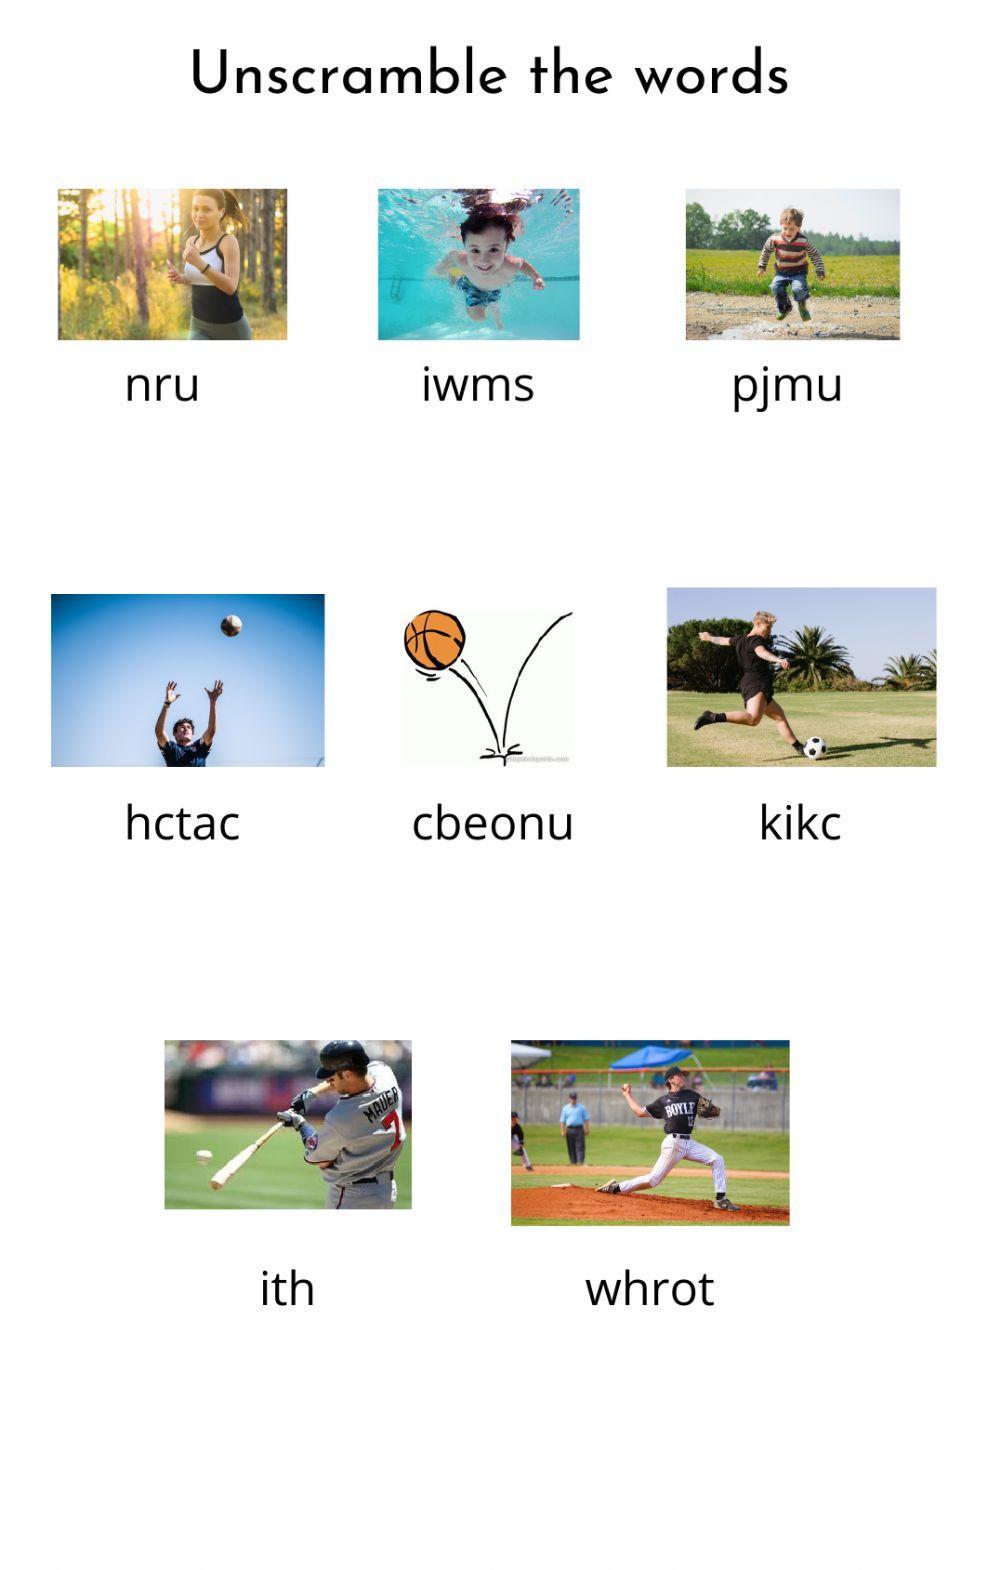 Action Verbs in Sports